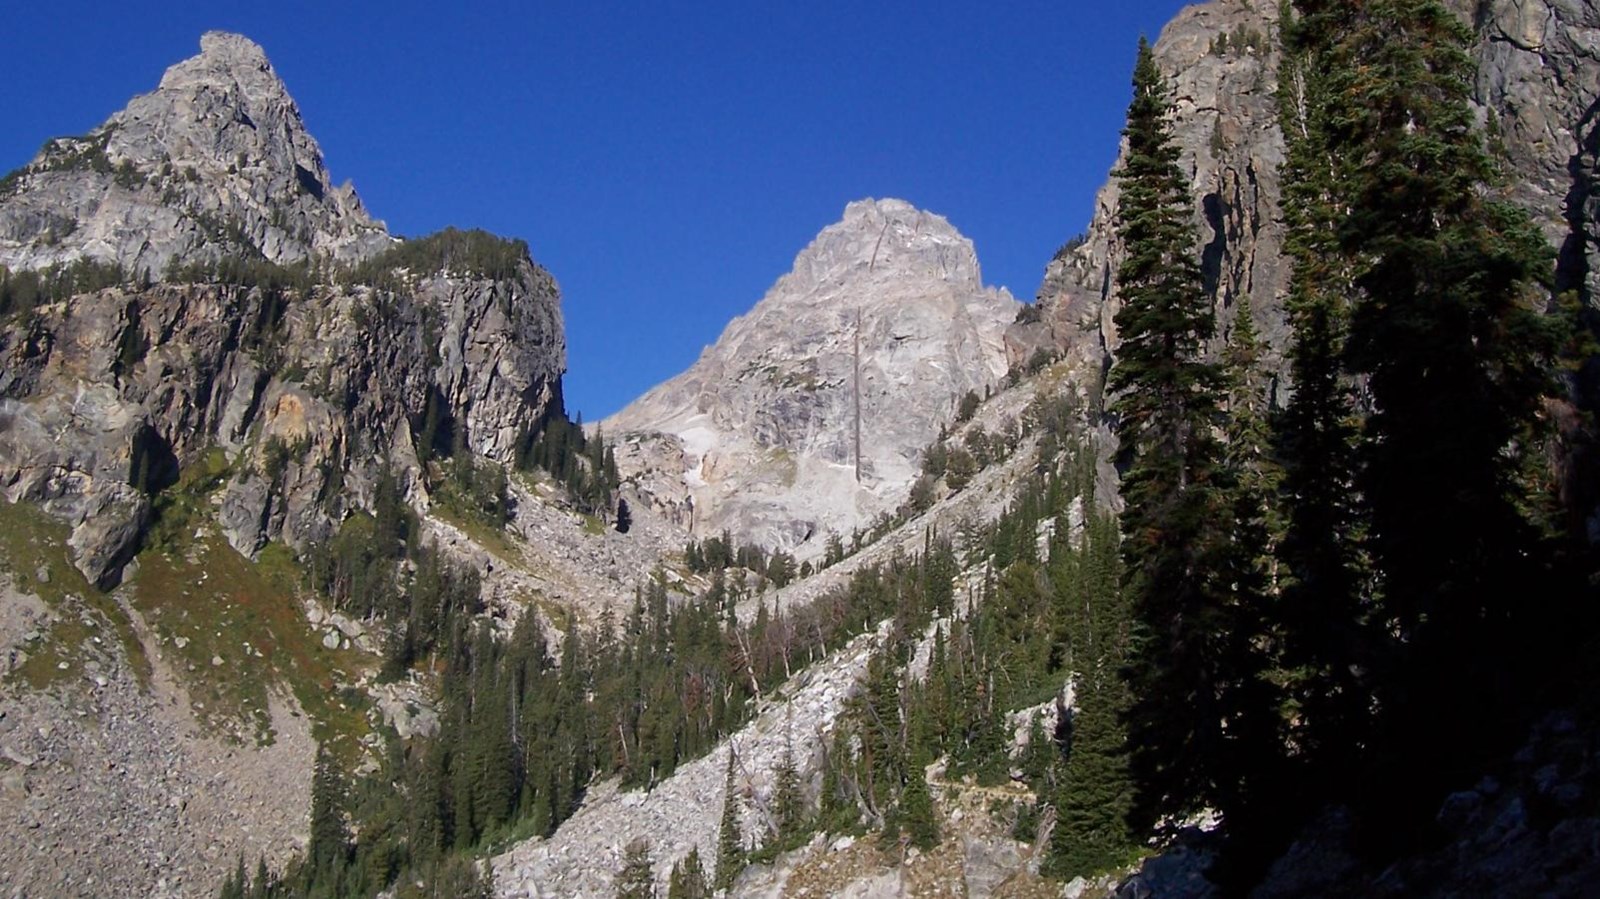 Steep mountains form a U shaped canyon. Conifers grip the mountains side at lower elevations.